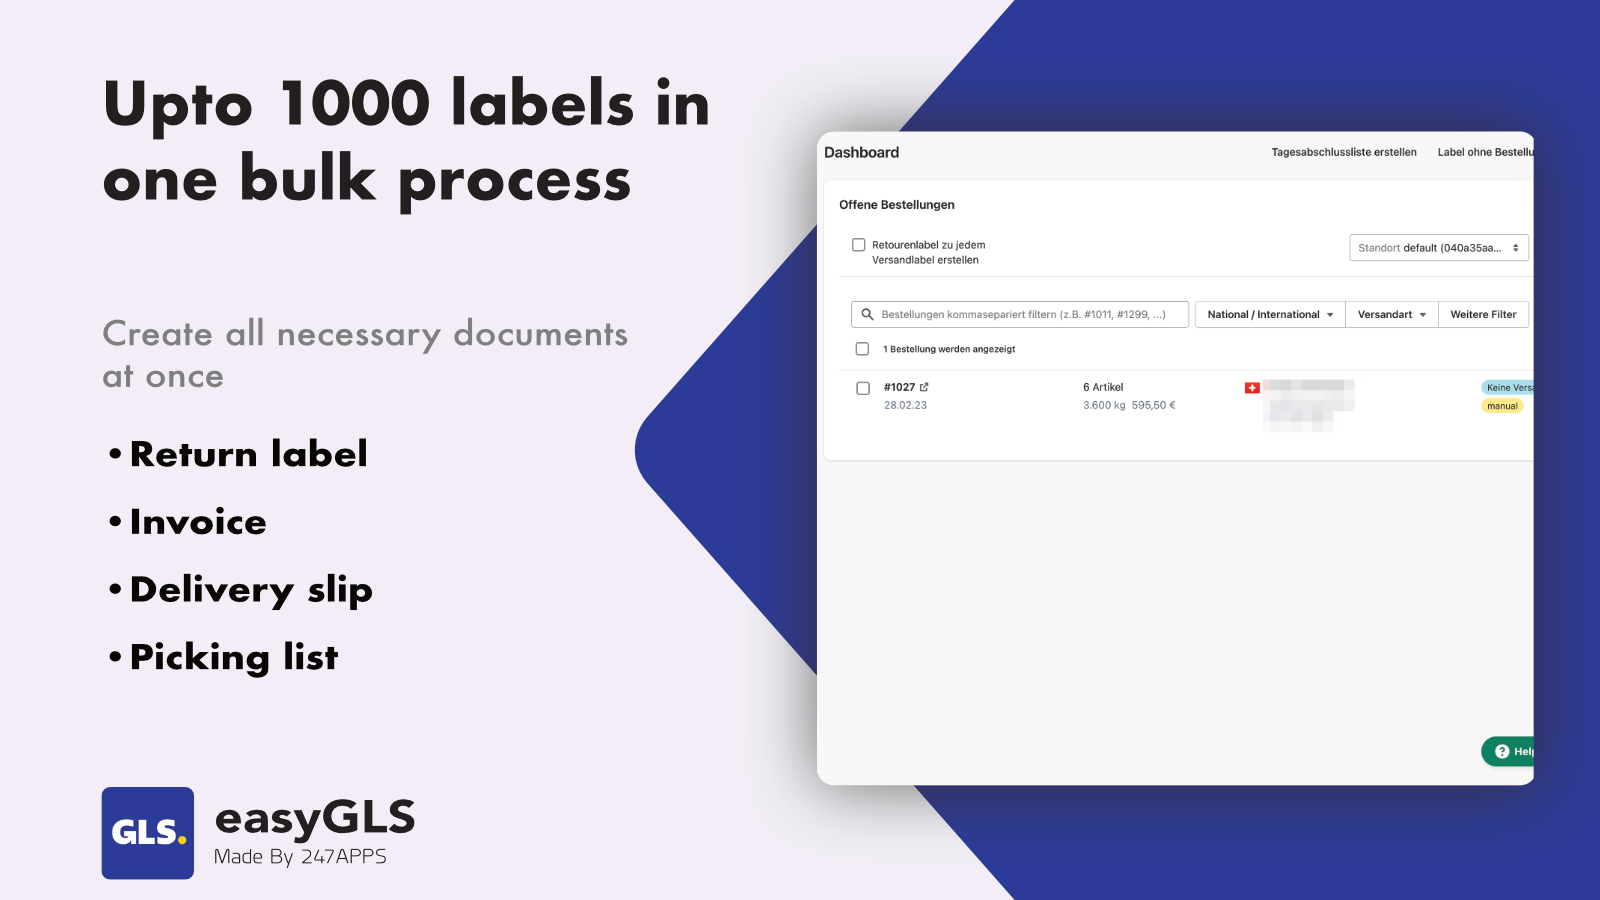 Up to 1000 shipping labels within one batch process